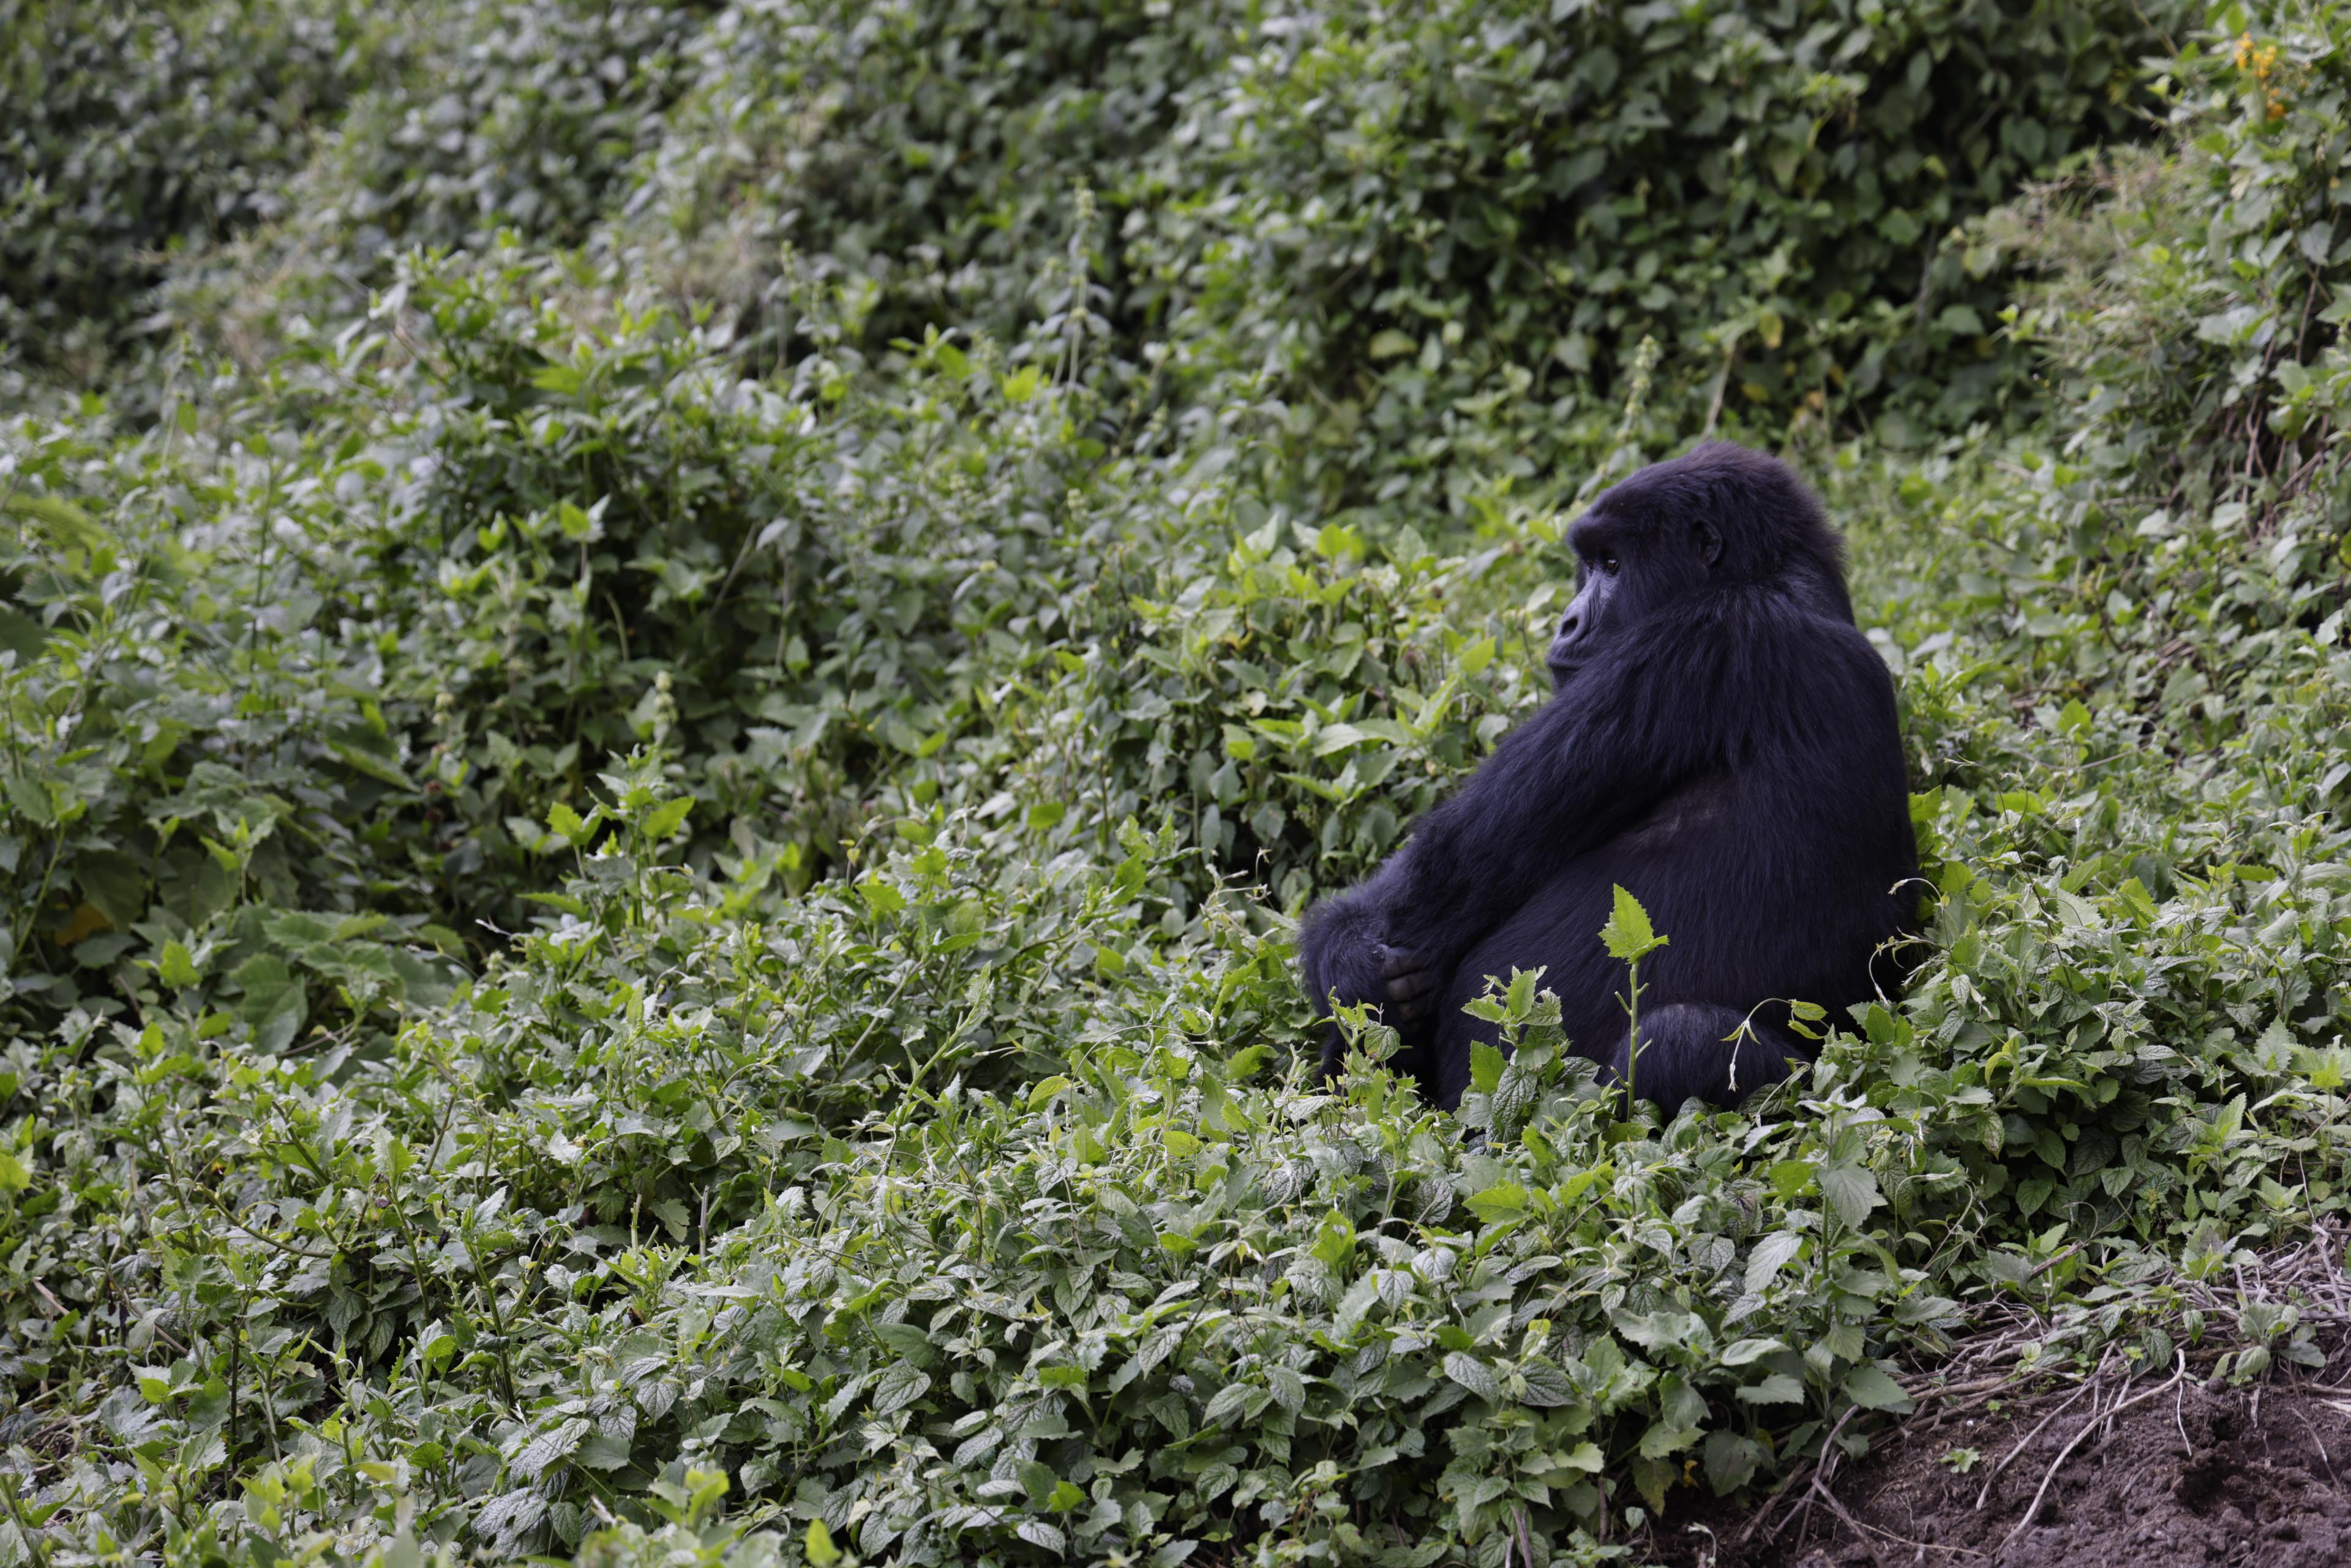 black gorilla sitting in greenery looking off to the left